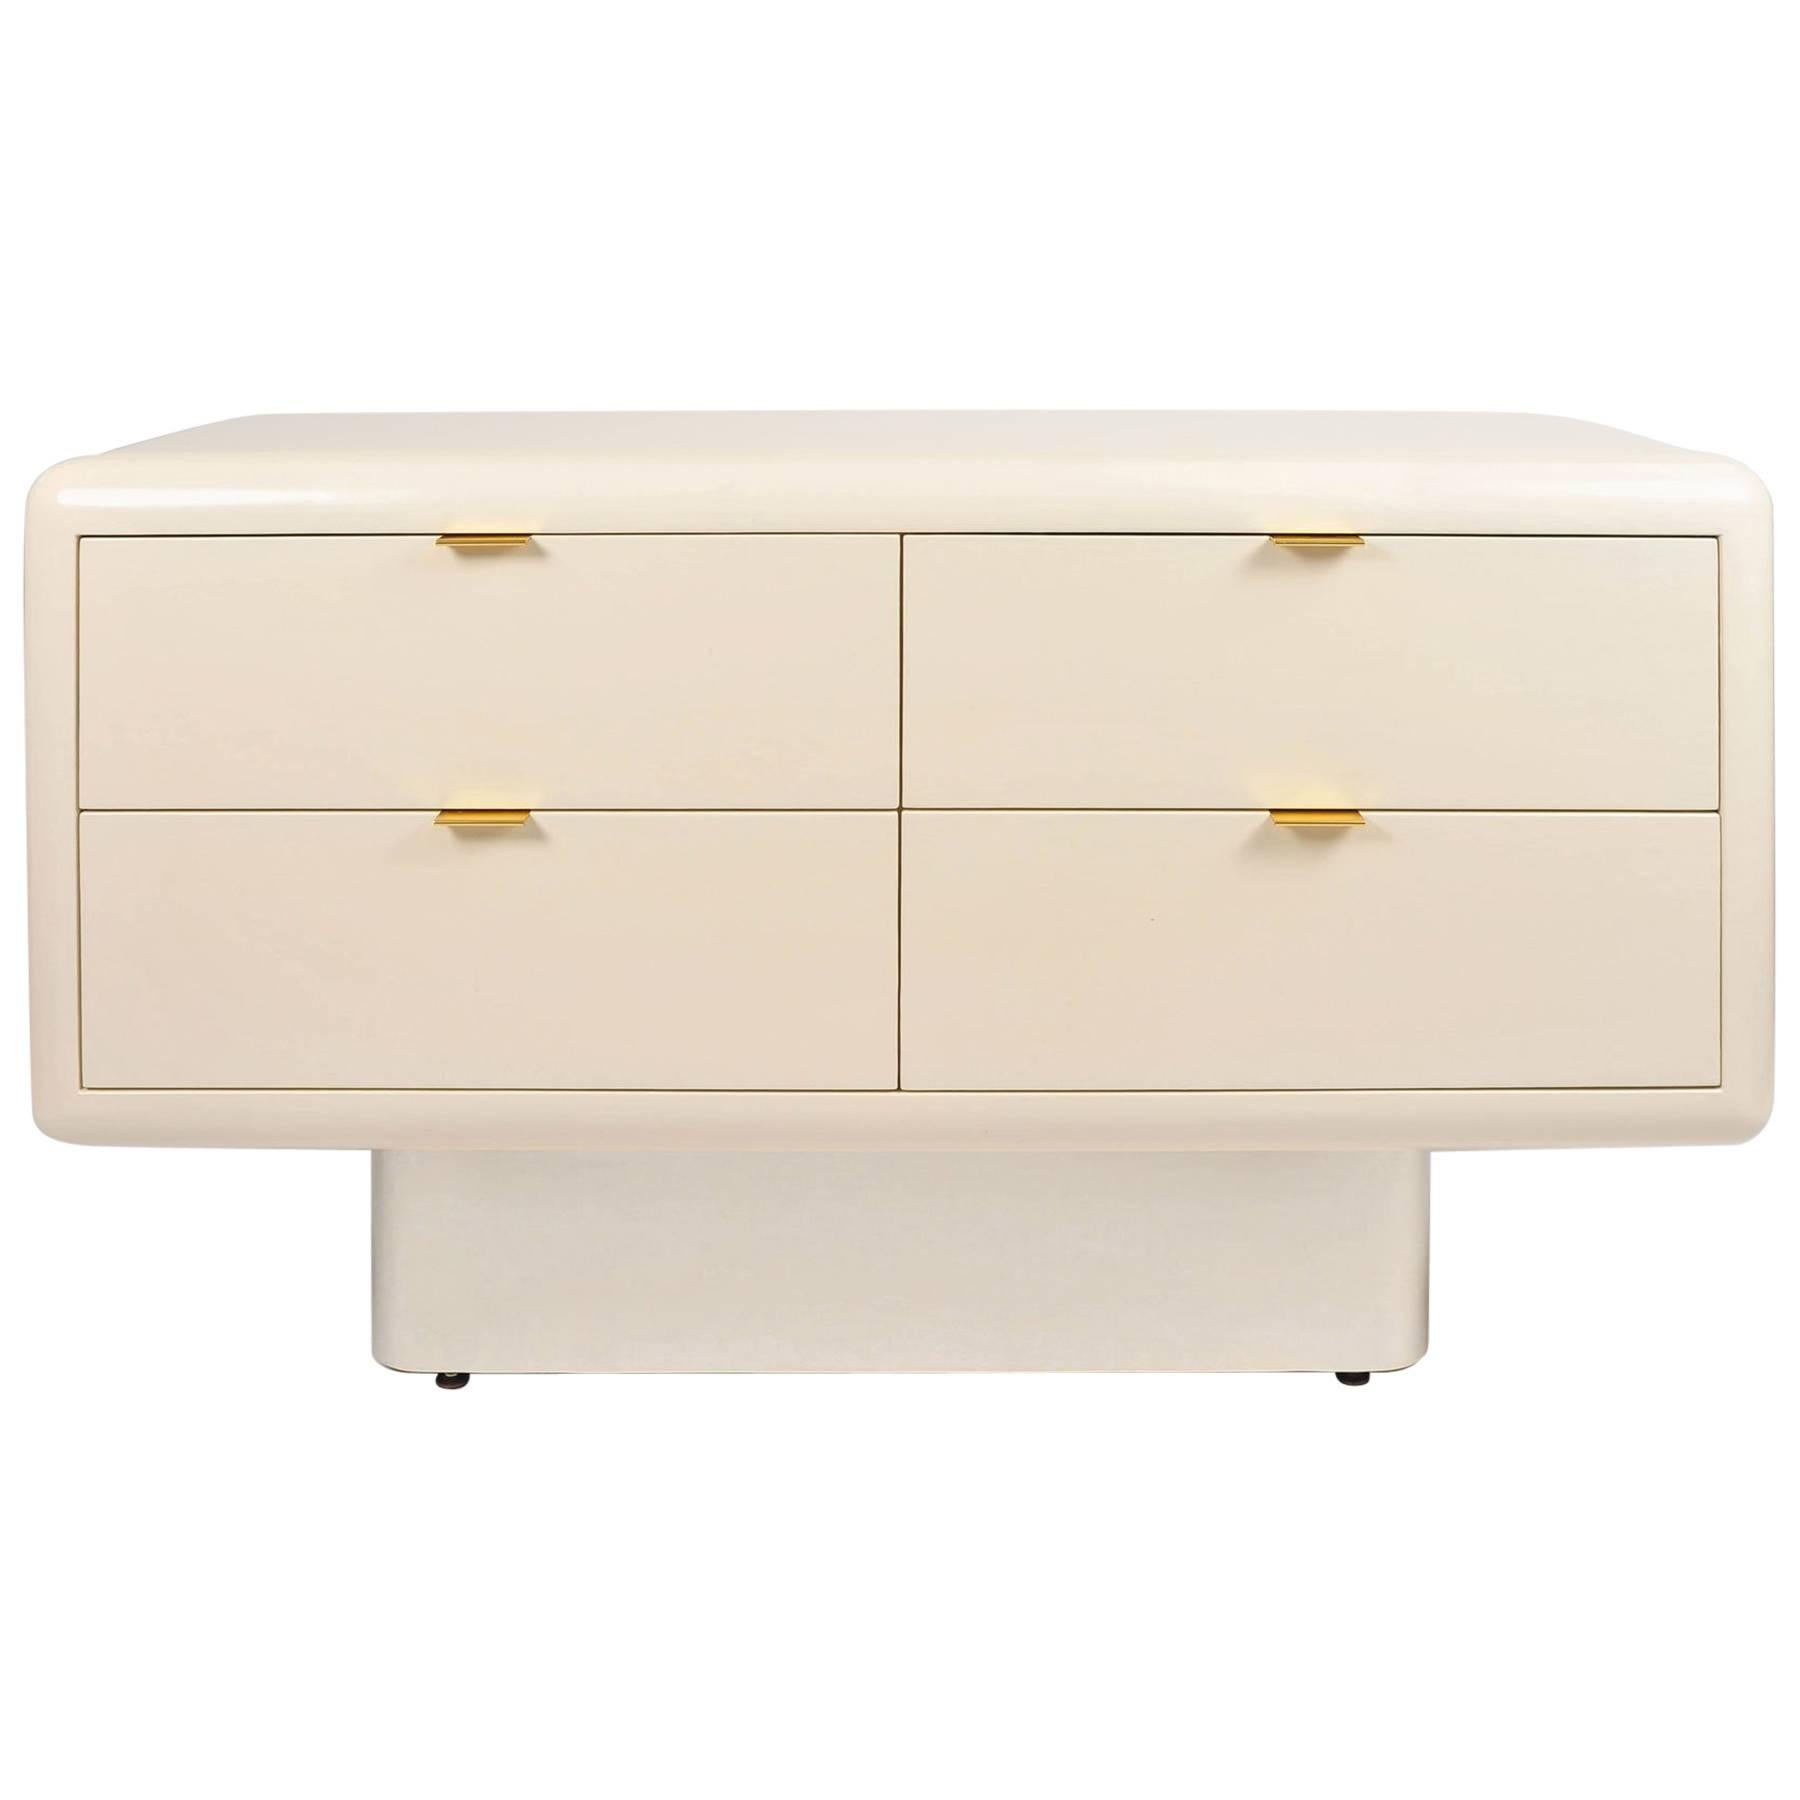 1980s Chest-of-drawers by American Designer and Decorator Steve Chase